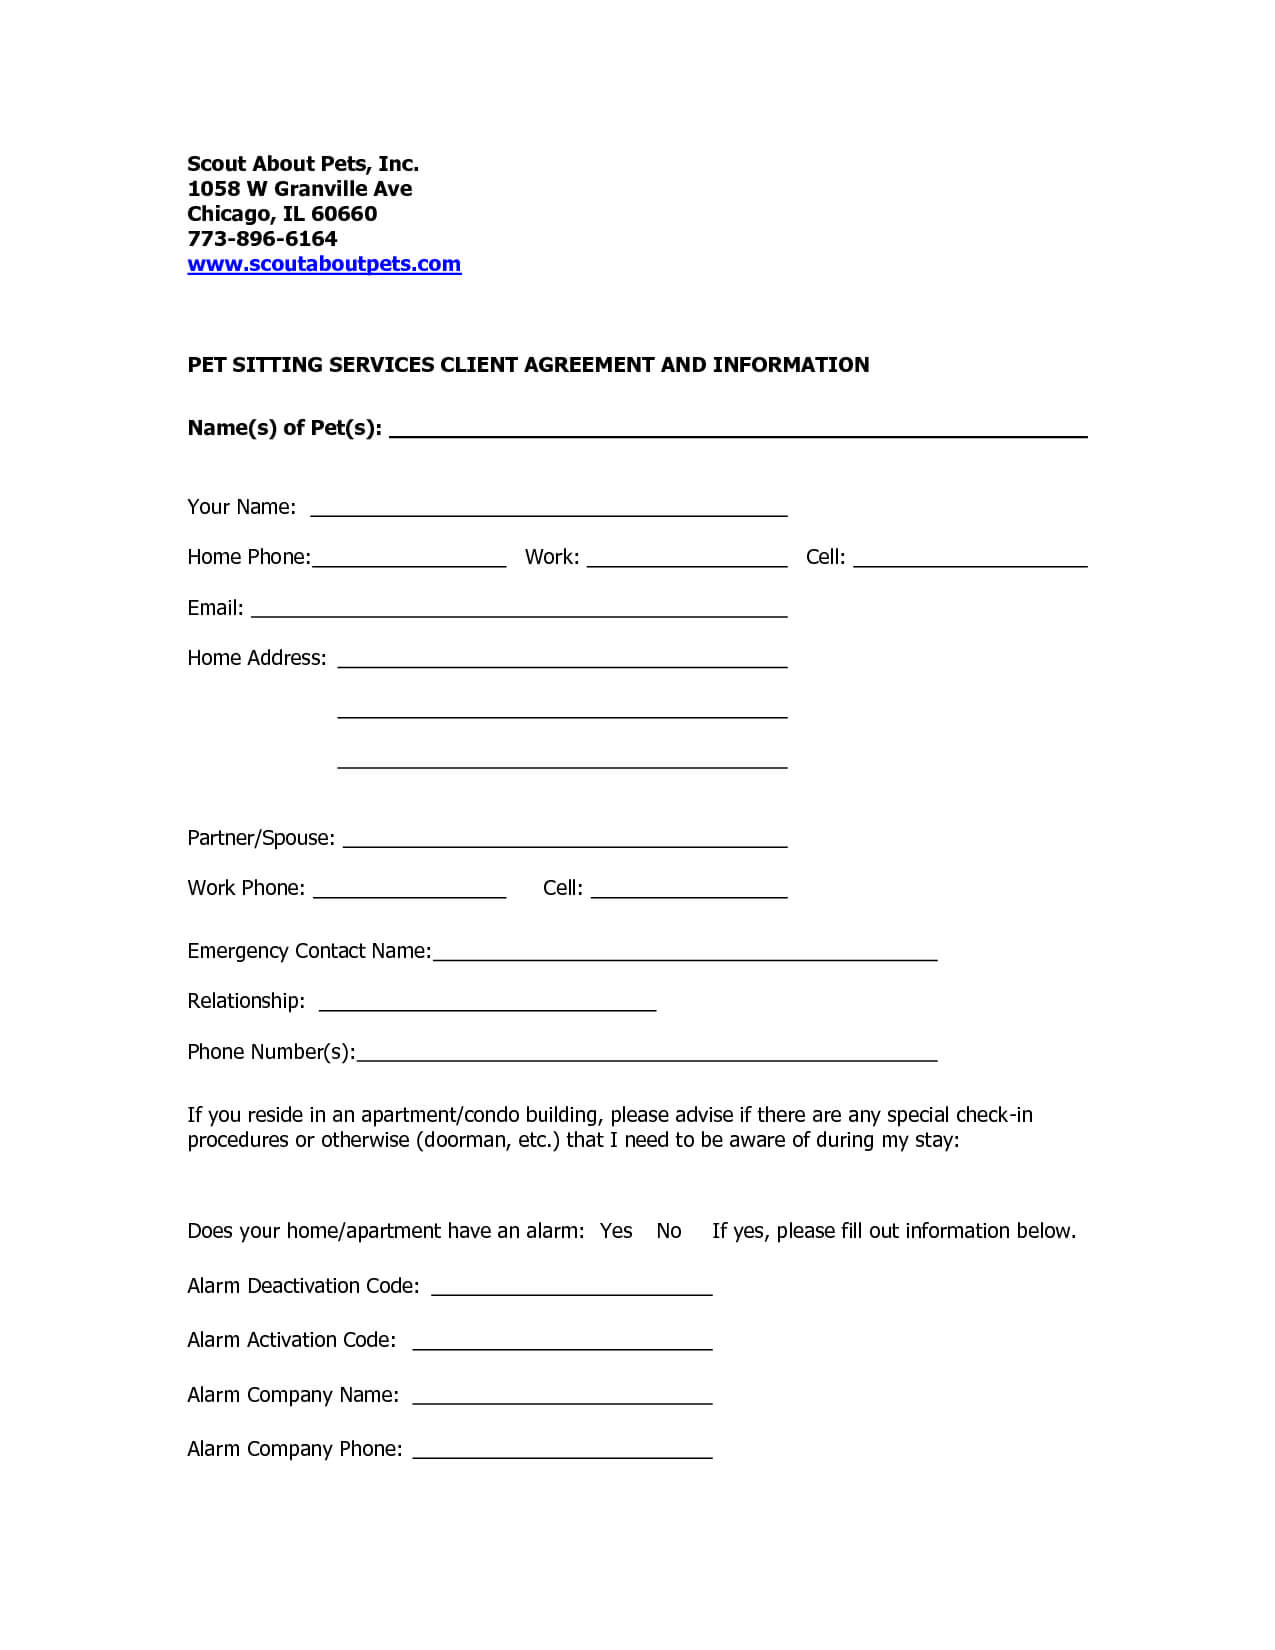 Professional Pet Sitting Forms Template | Dog Sitting Form Regarding Dog Grooming Record Card Template